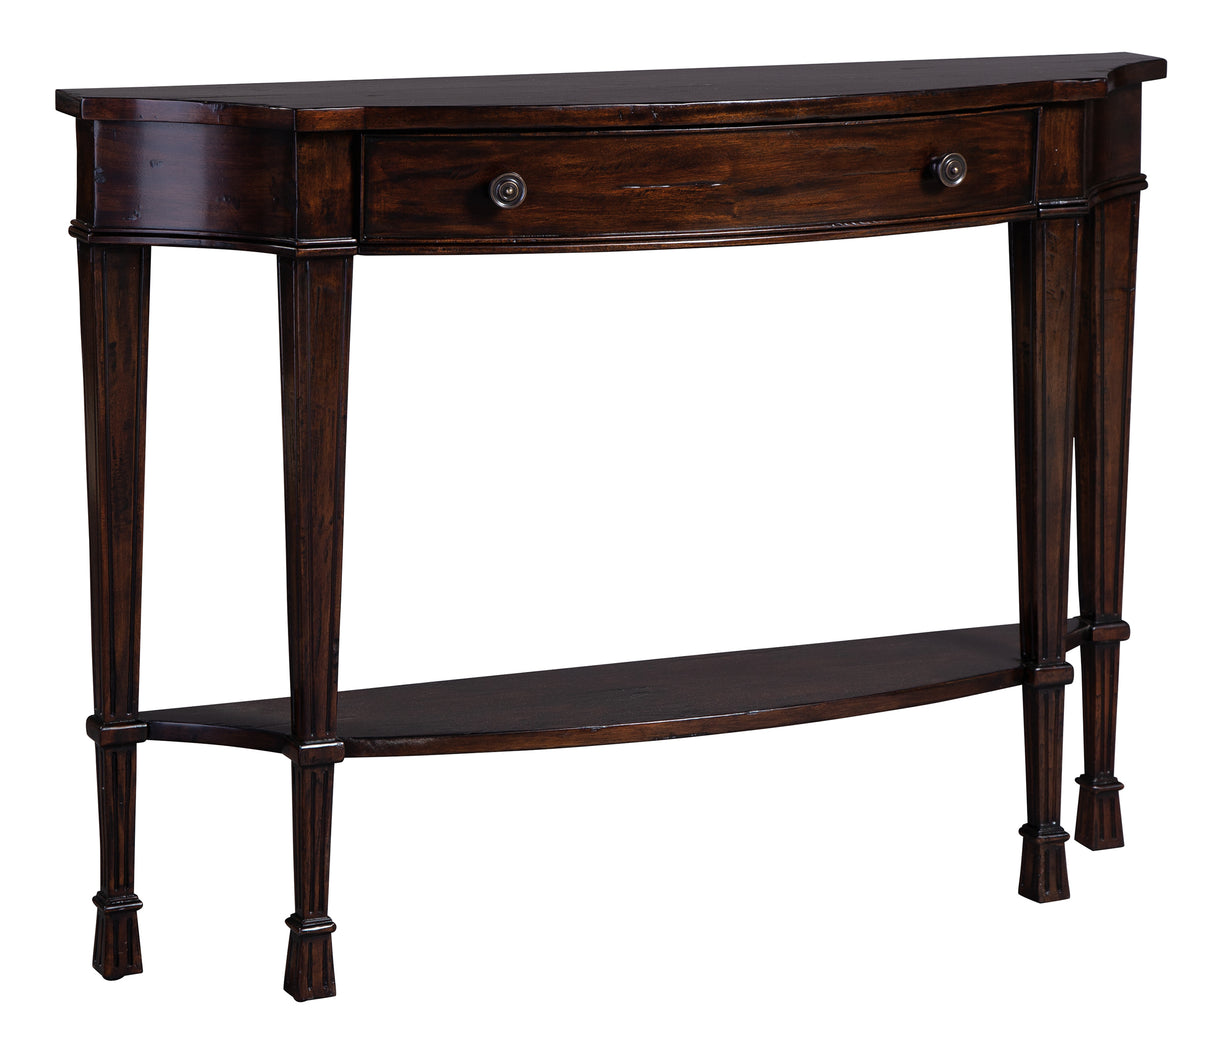 Hekman 27981 Accents 45in. x 10in. x 33.5in. Sofa Table